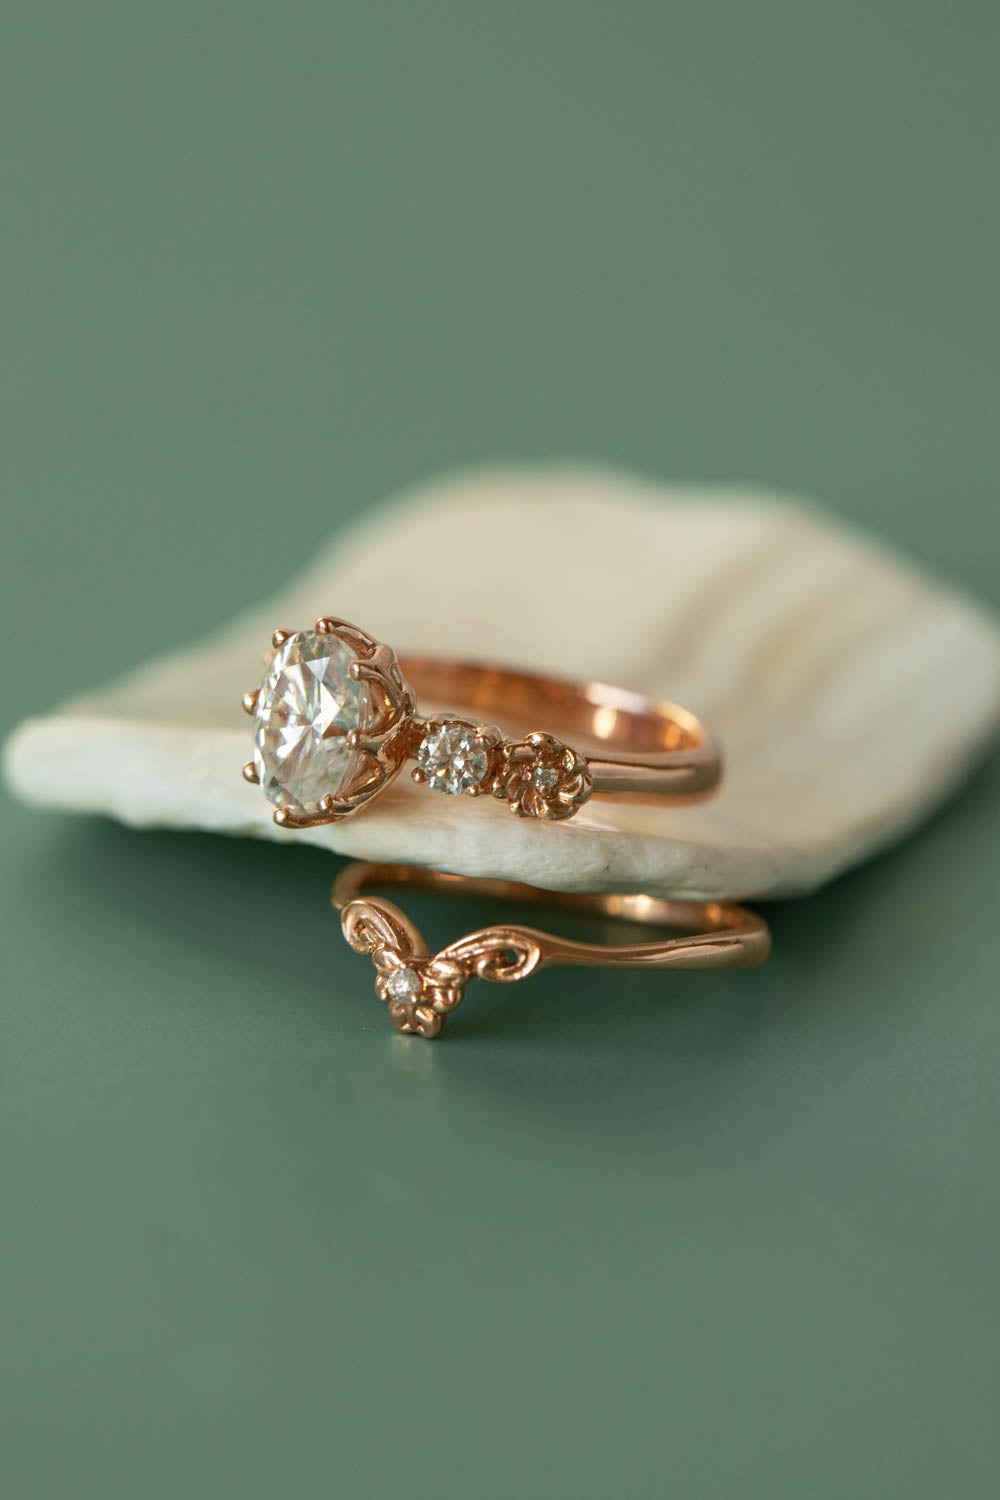 Ethical lab grown diamond engagement ring, rose gold flower promise ring with diamonds / Fiorella - Eden Garden Jewelry™